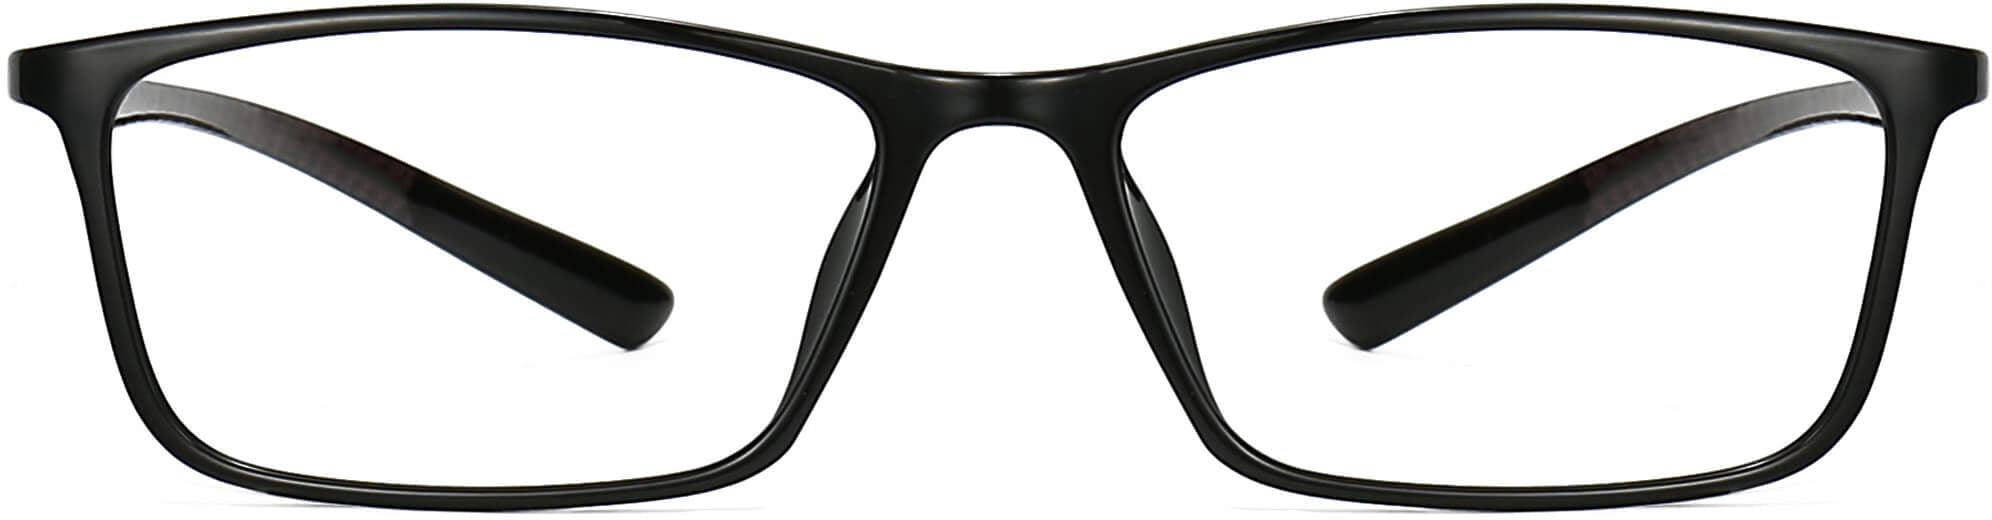 Aabriella Rectangle Black Eyeglasses from ANRRI, front view